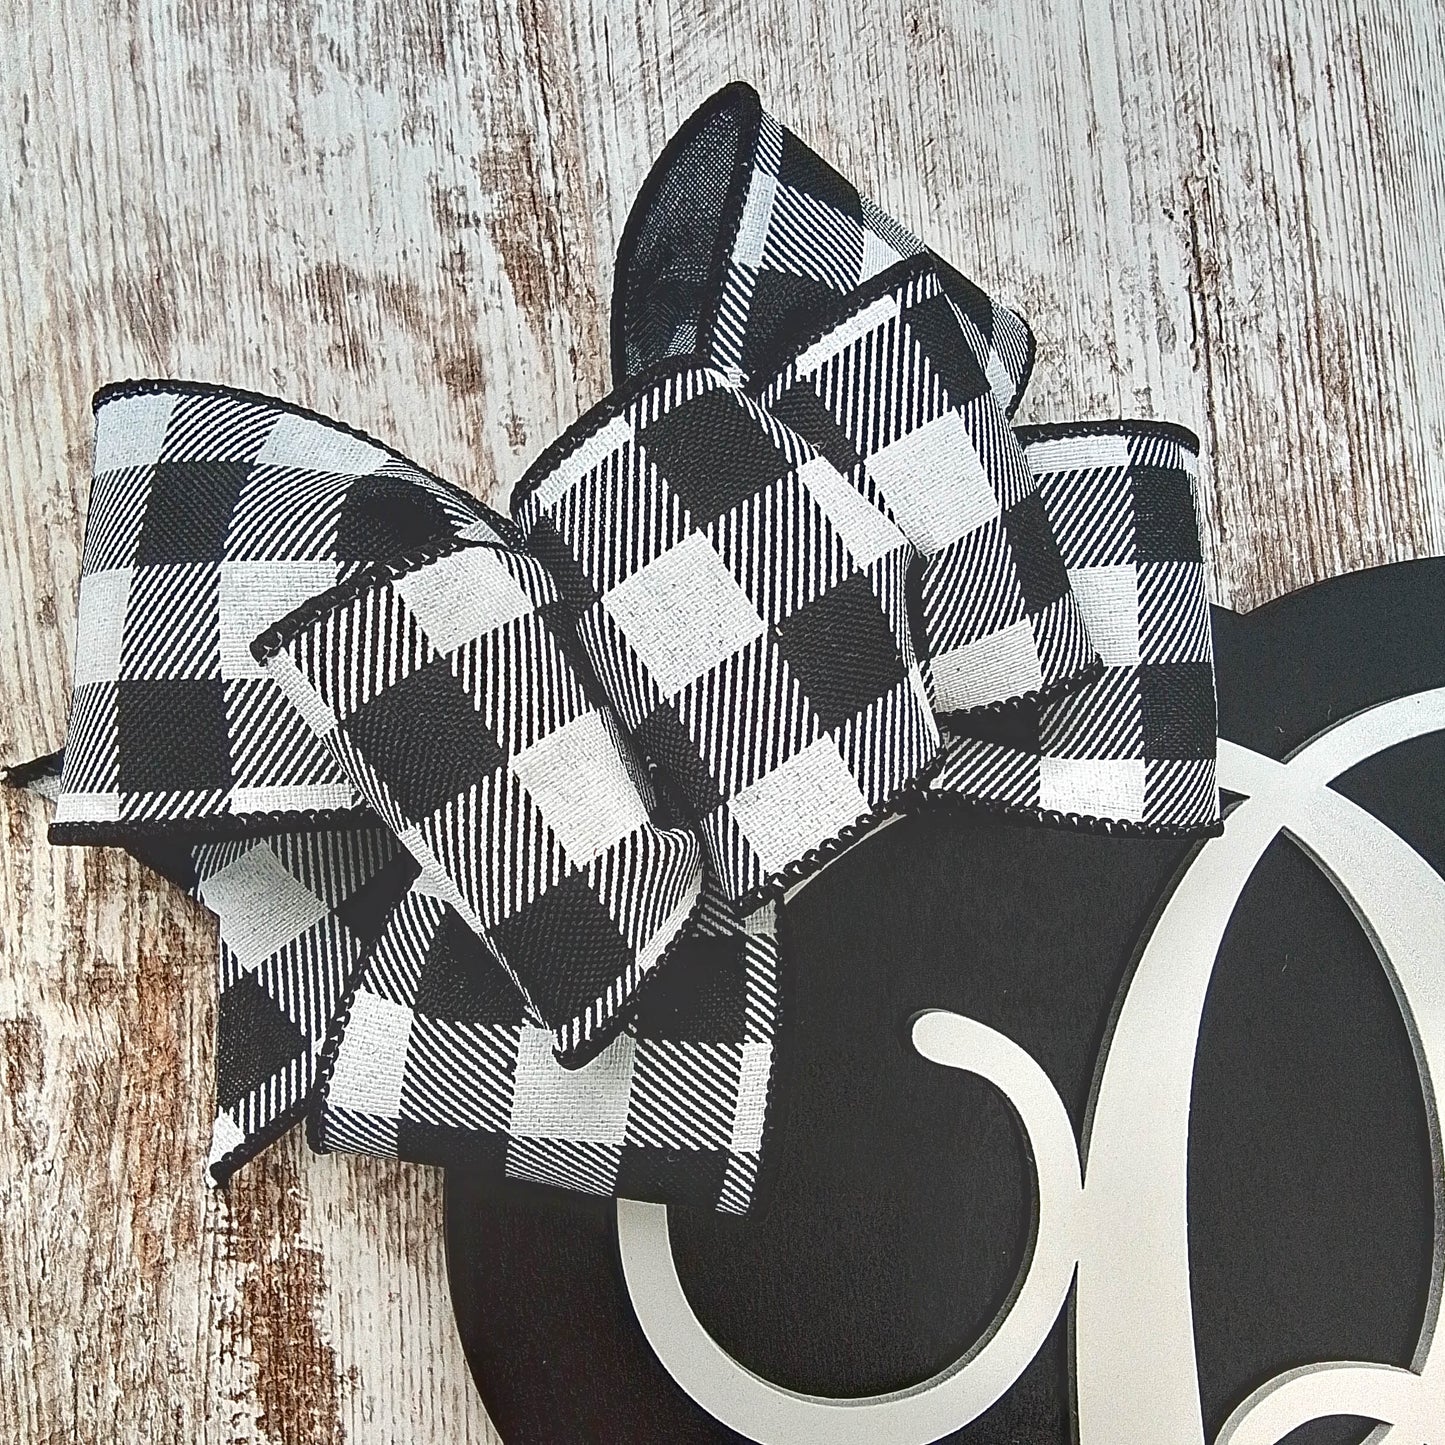 Monogrammed Birthday Gift | White Black Initial Letter Door Hanger Wreath with Bow - LOTS OF COLORS